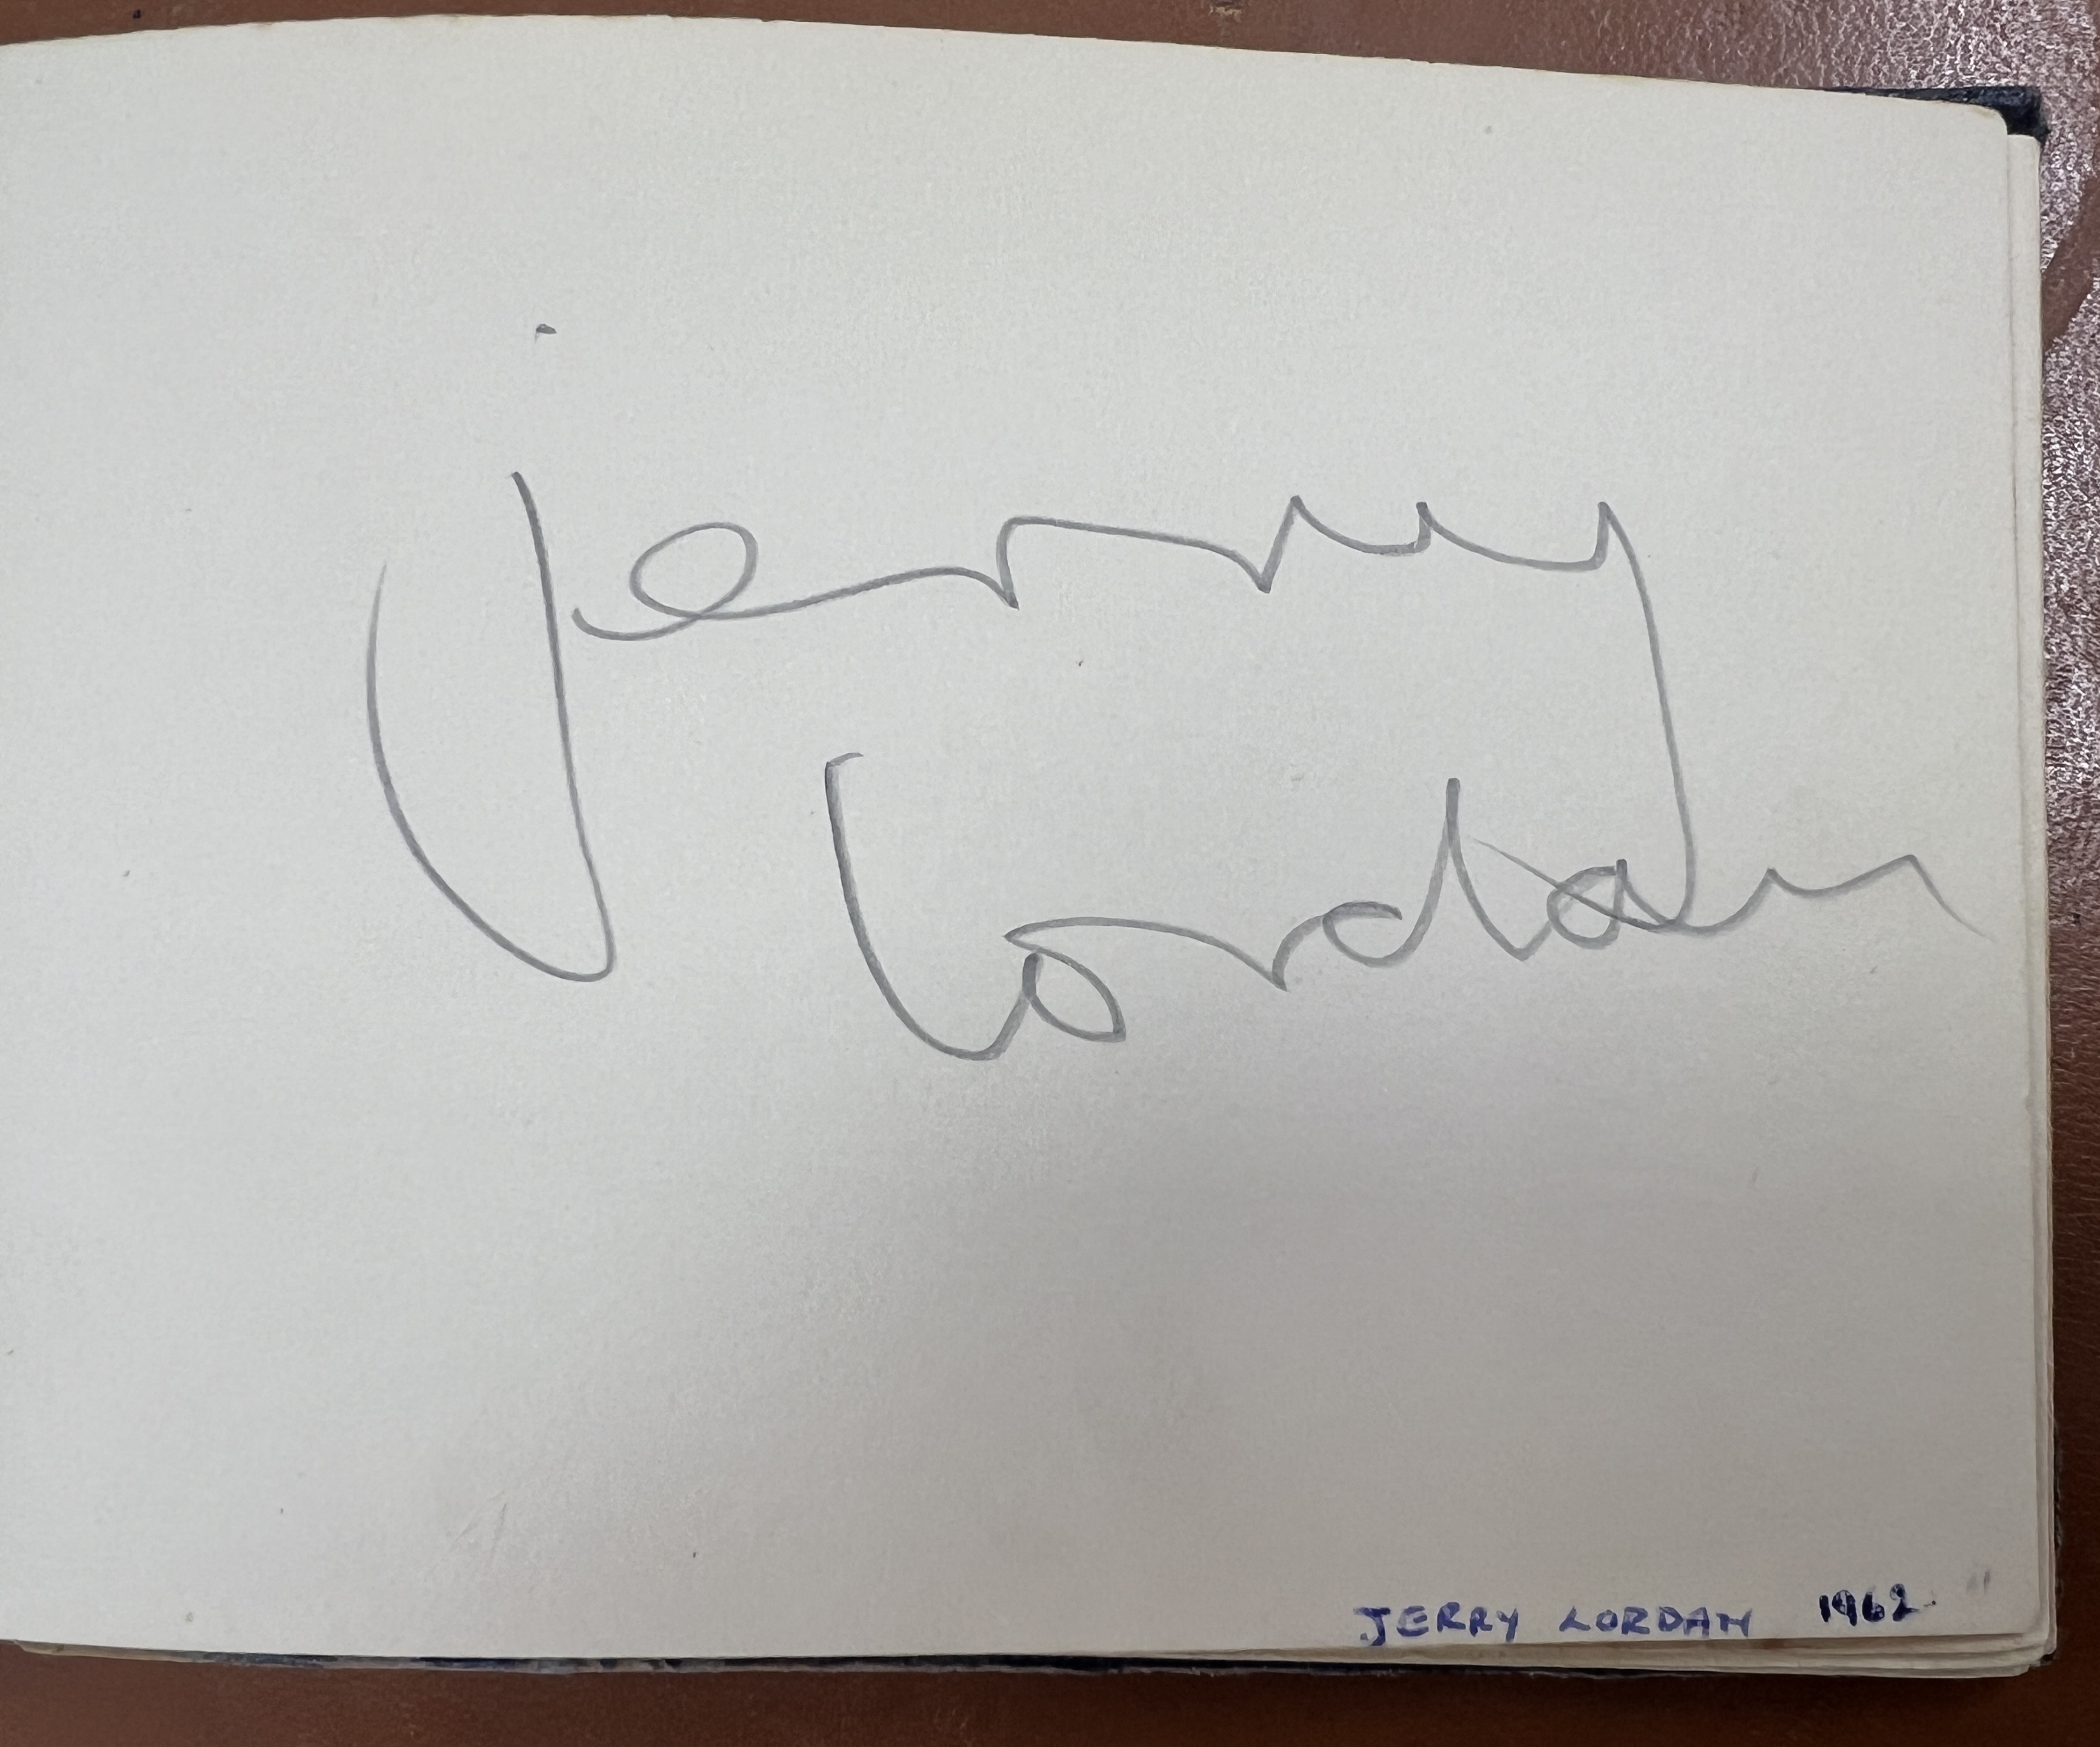 A 1960's autograph album containing autographs of various celebrities including Cliff Richard, - Image 15 of 37